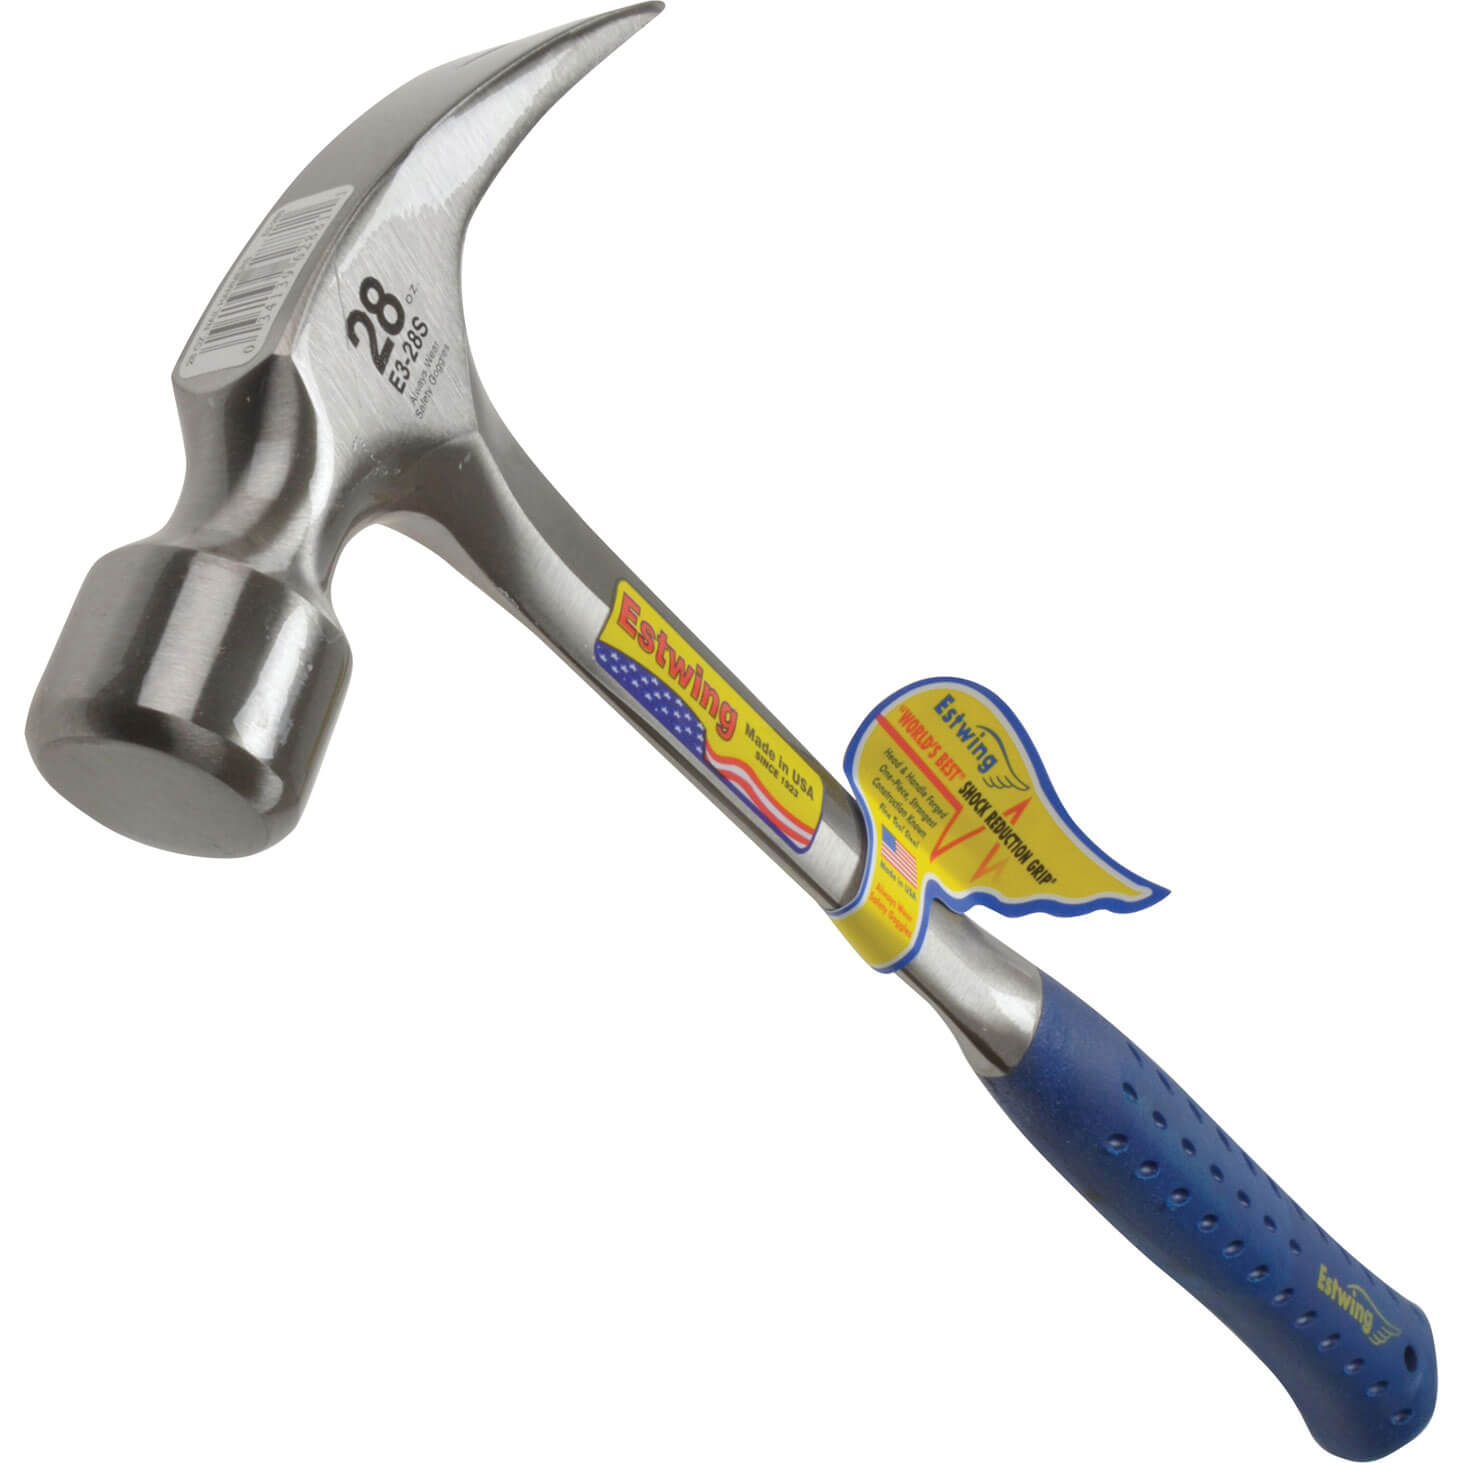 Estwing Straight Claw Framing Hammer 784g